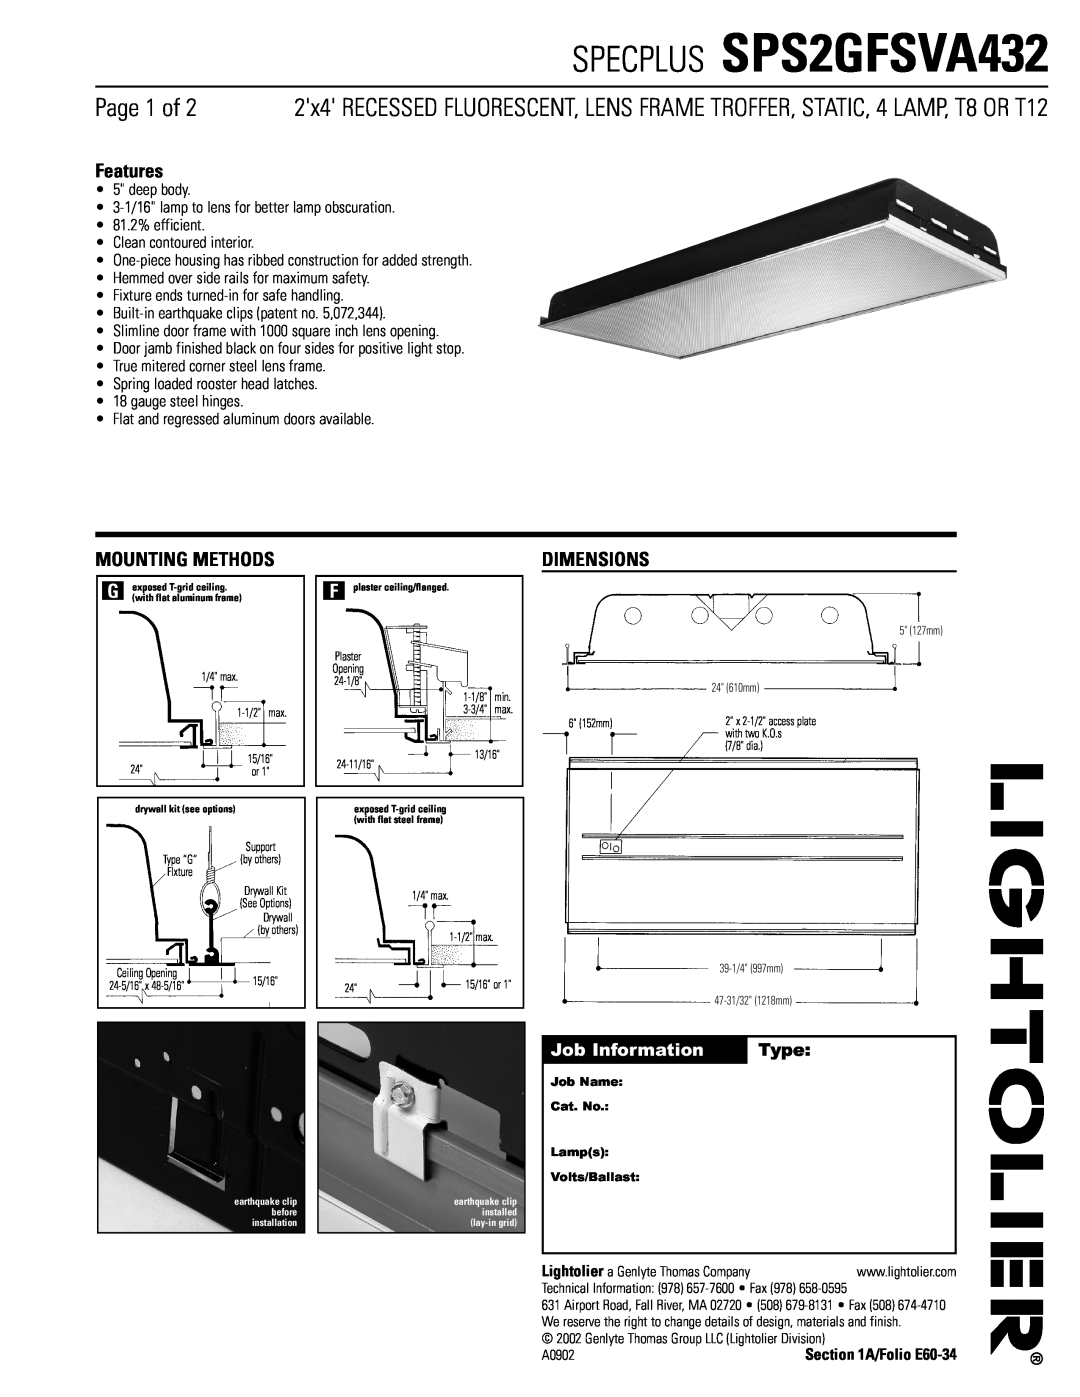 Lightolier dimensions SPECPLUS SPS2GFSVA432, Page 1 of, Features, Mounting Methods, Dimensions, Job Information, Type 